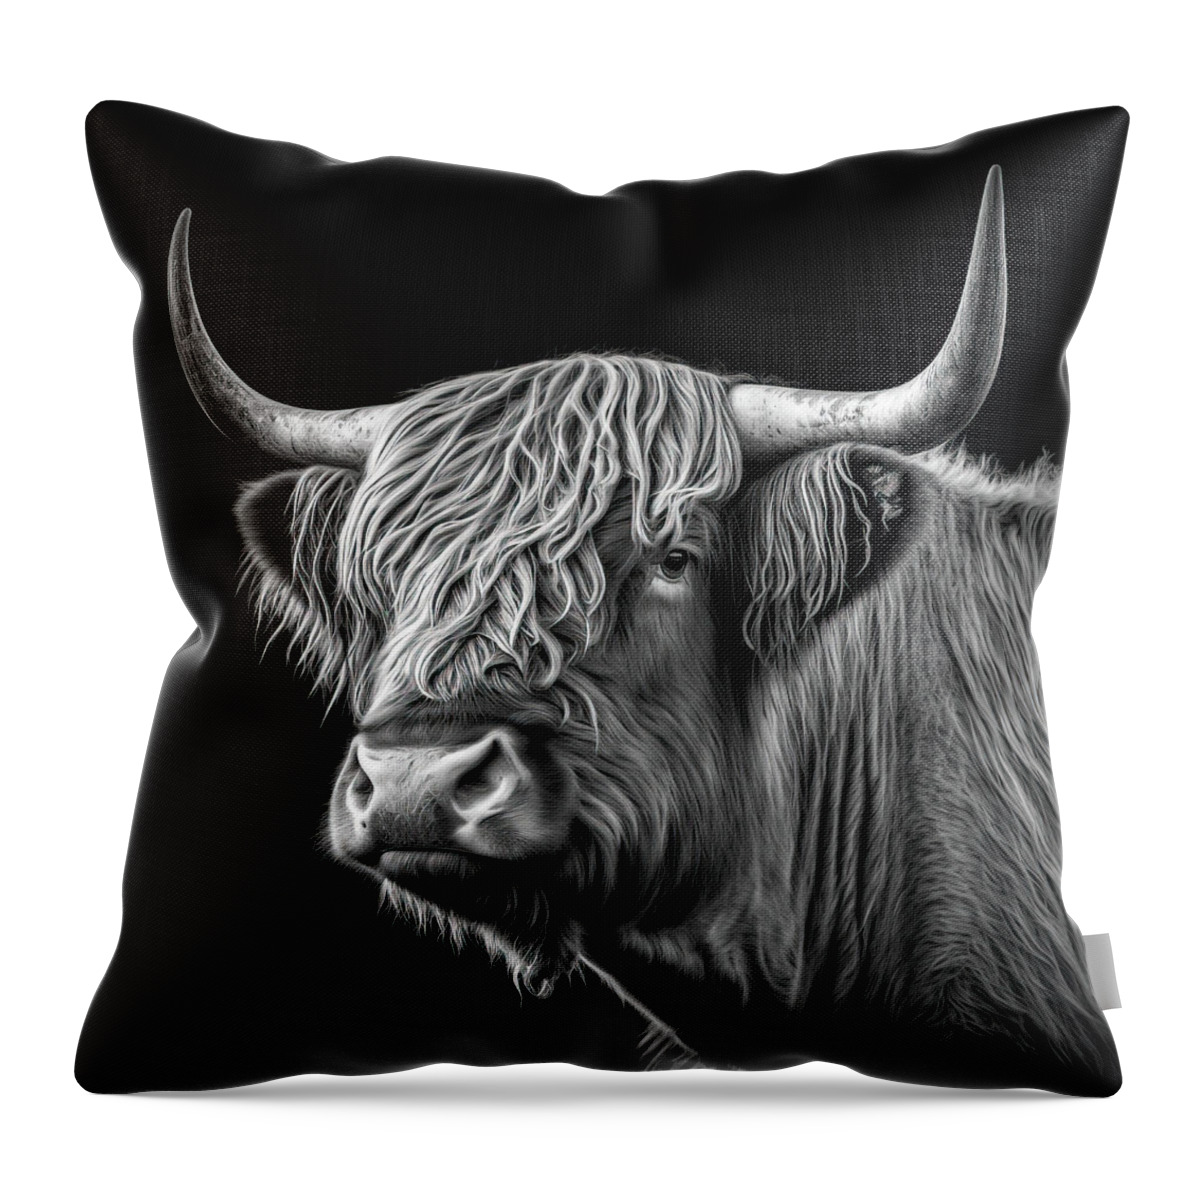 Bull Throw Pillow featuring the digital art Highland Cattle Portrait 03 Black and White by Matthias Hauser